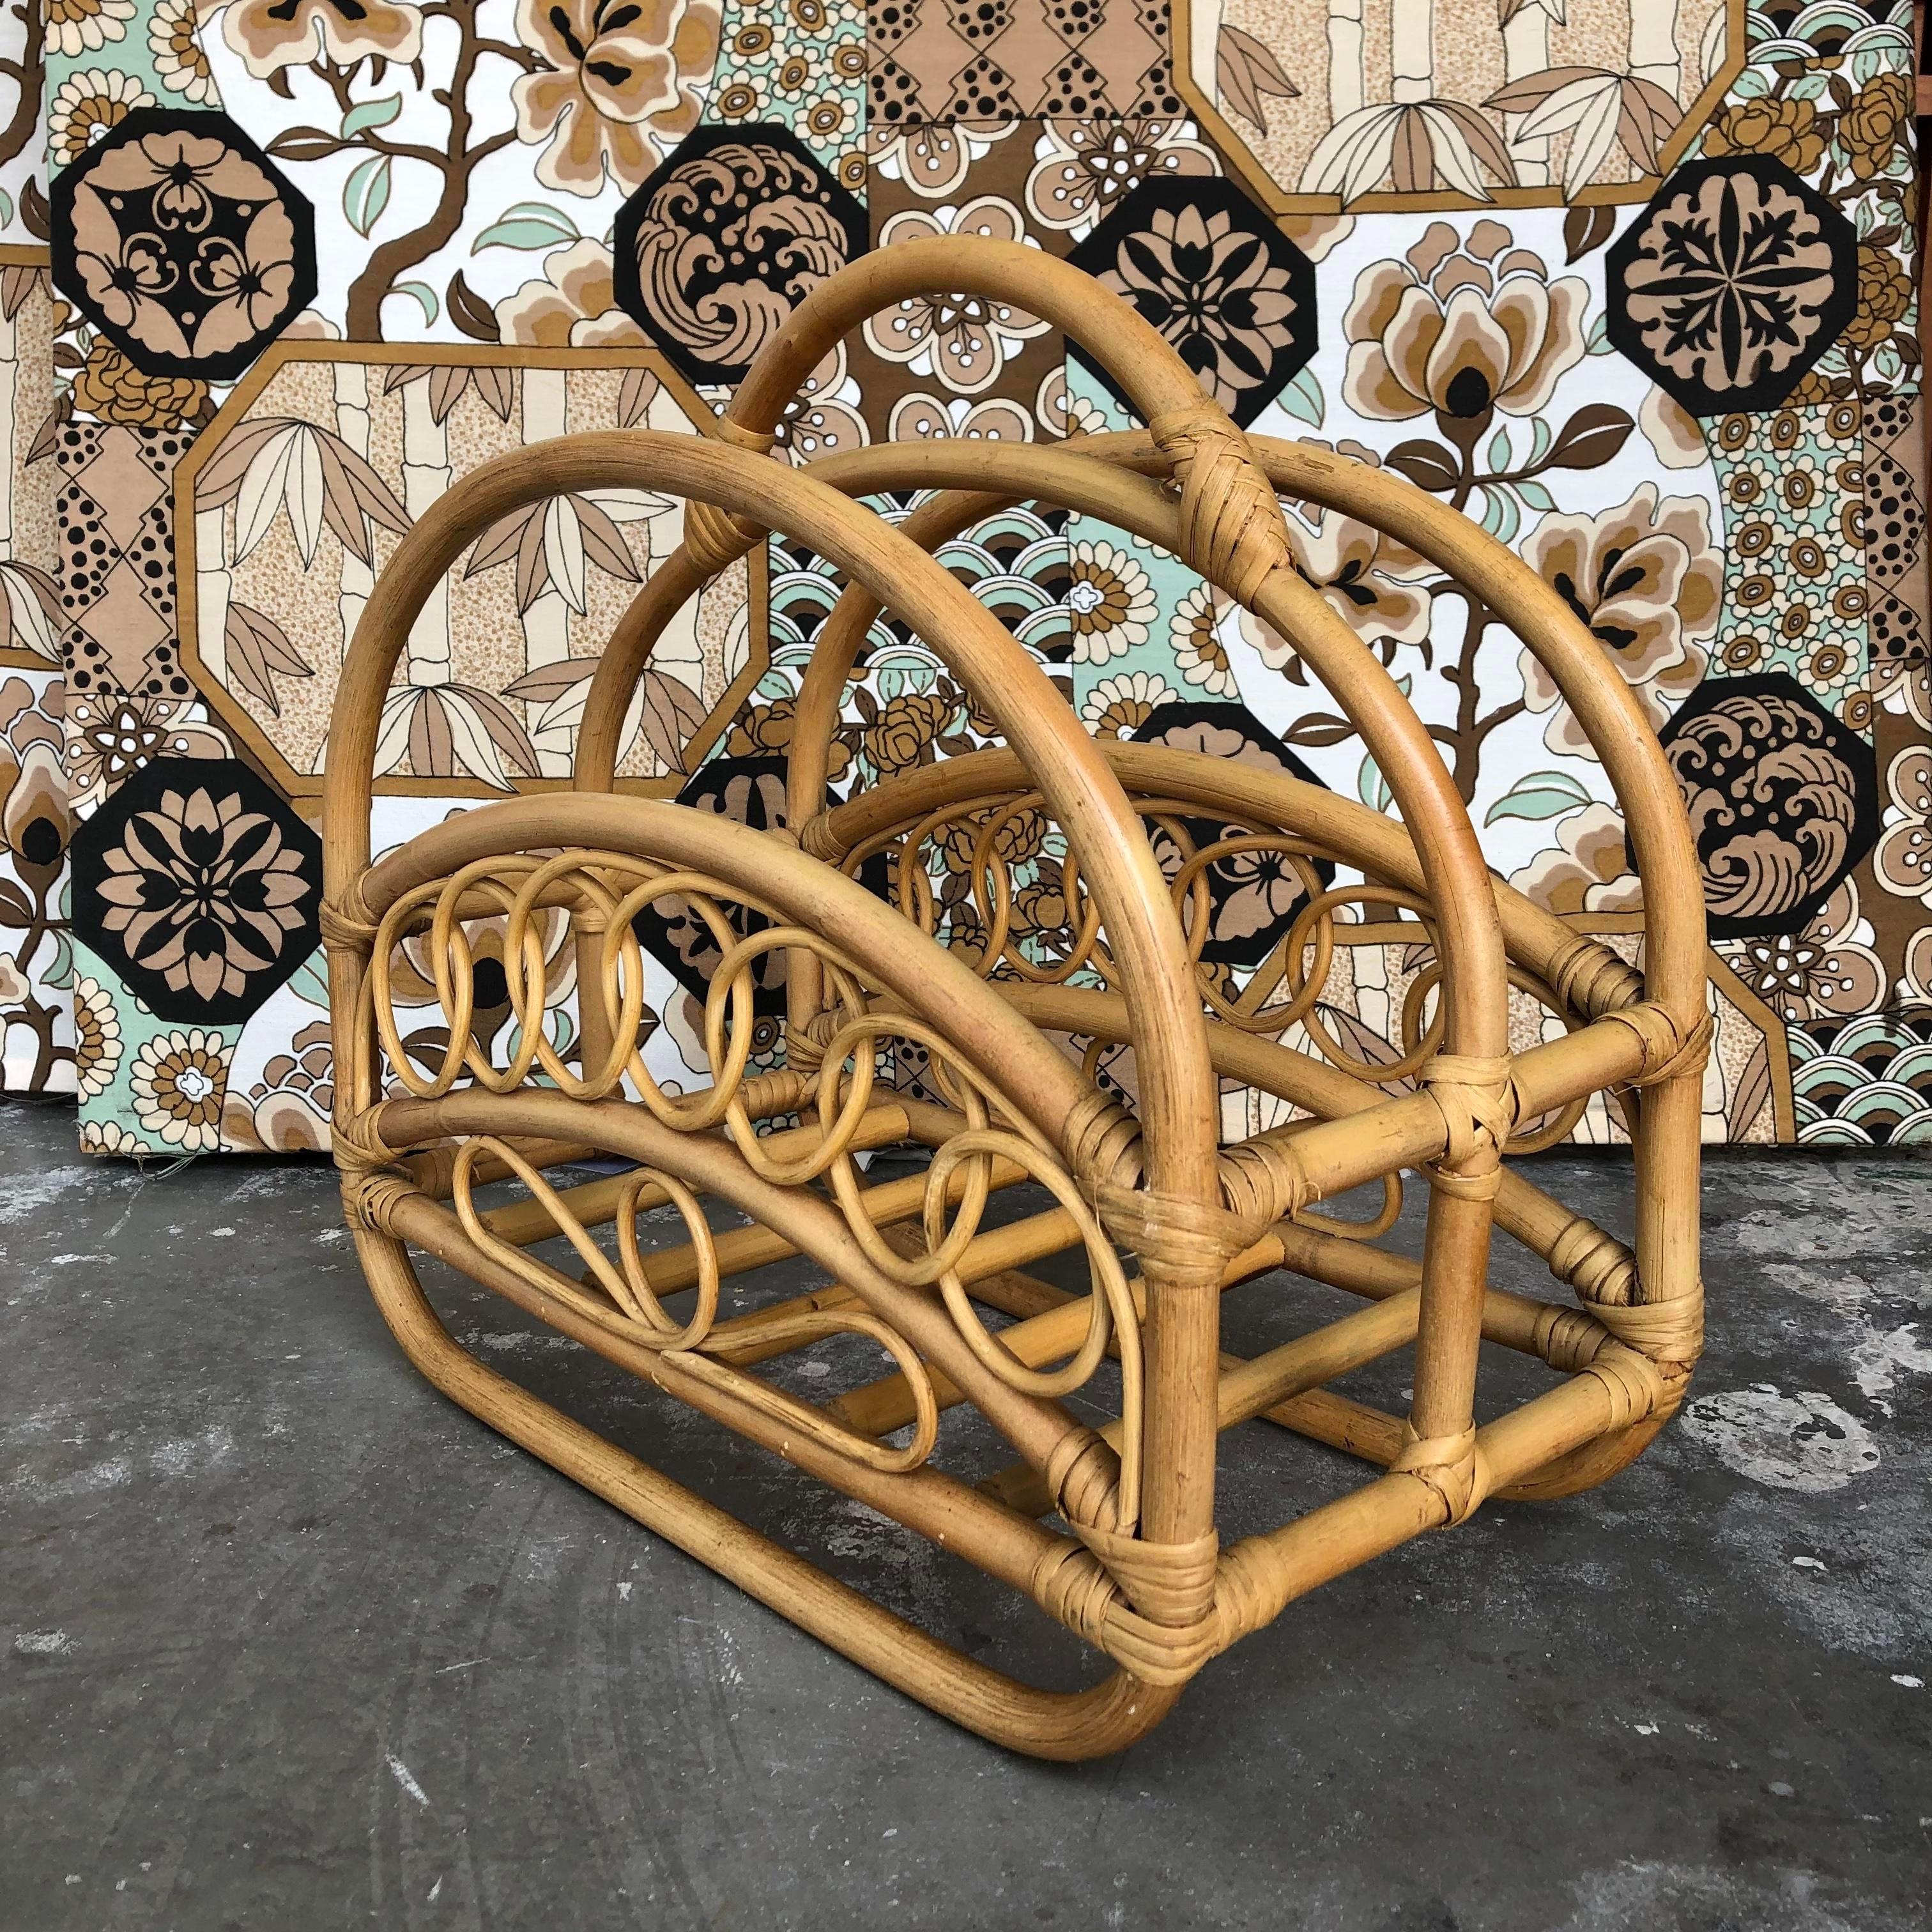 Vintage Mid Century Modern Bamboo and Rattan Magazine Rack in The Franco Albini Style. C 1970s
Features a natural color bent bamboo frame with a curved handle and undulating trellis pattern design on both sides.
In Very Good Original Condition with